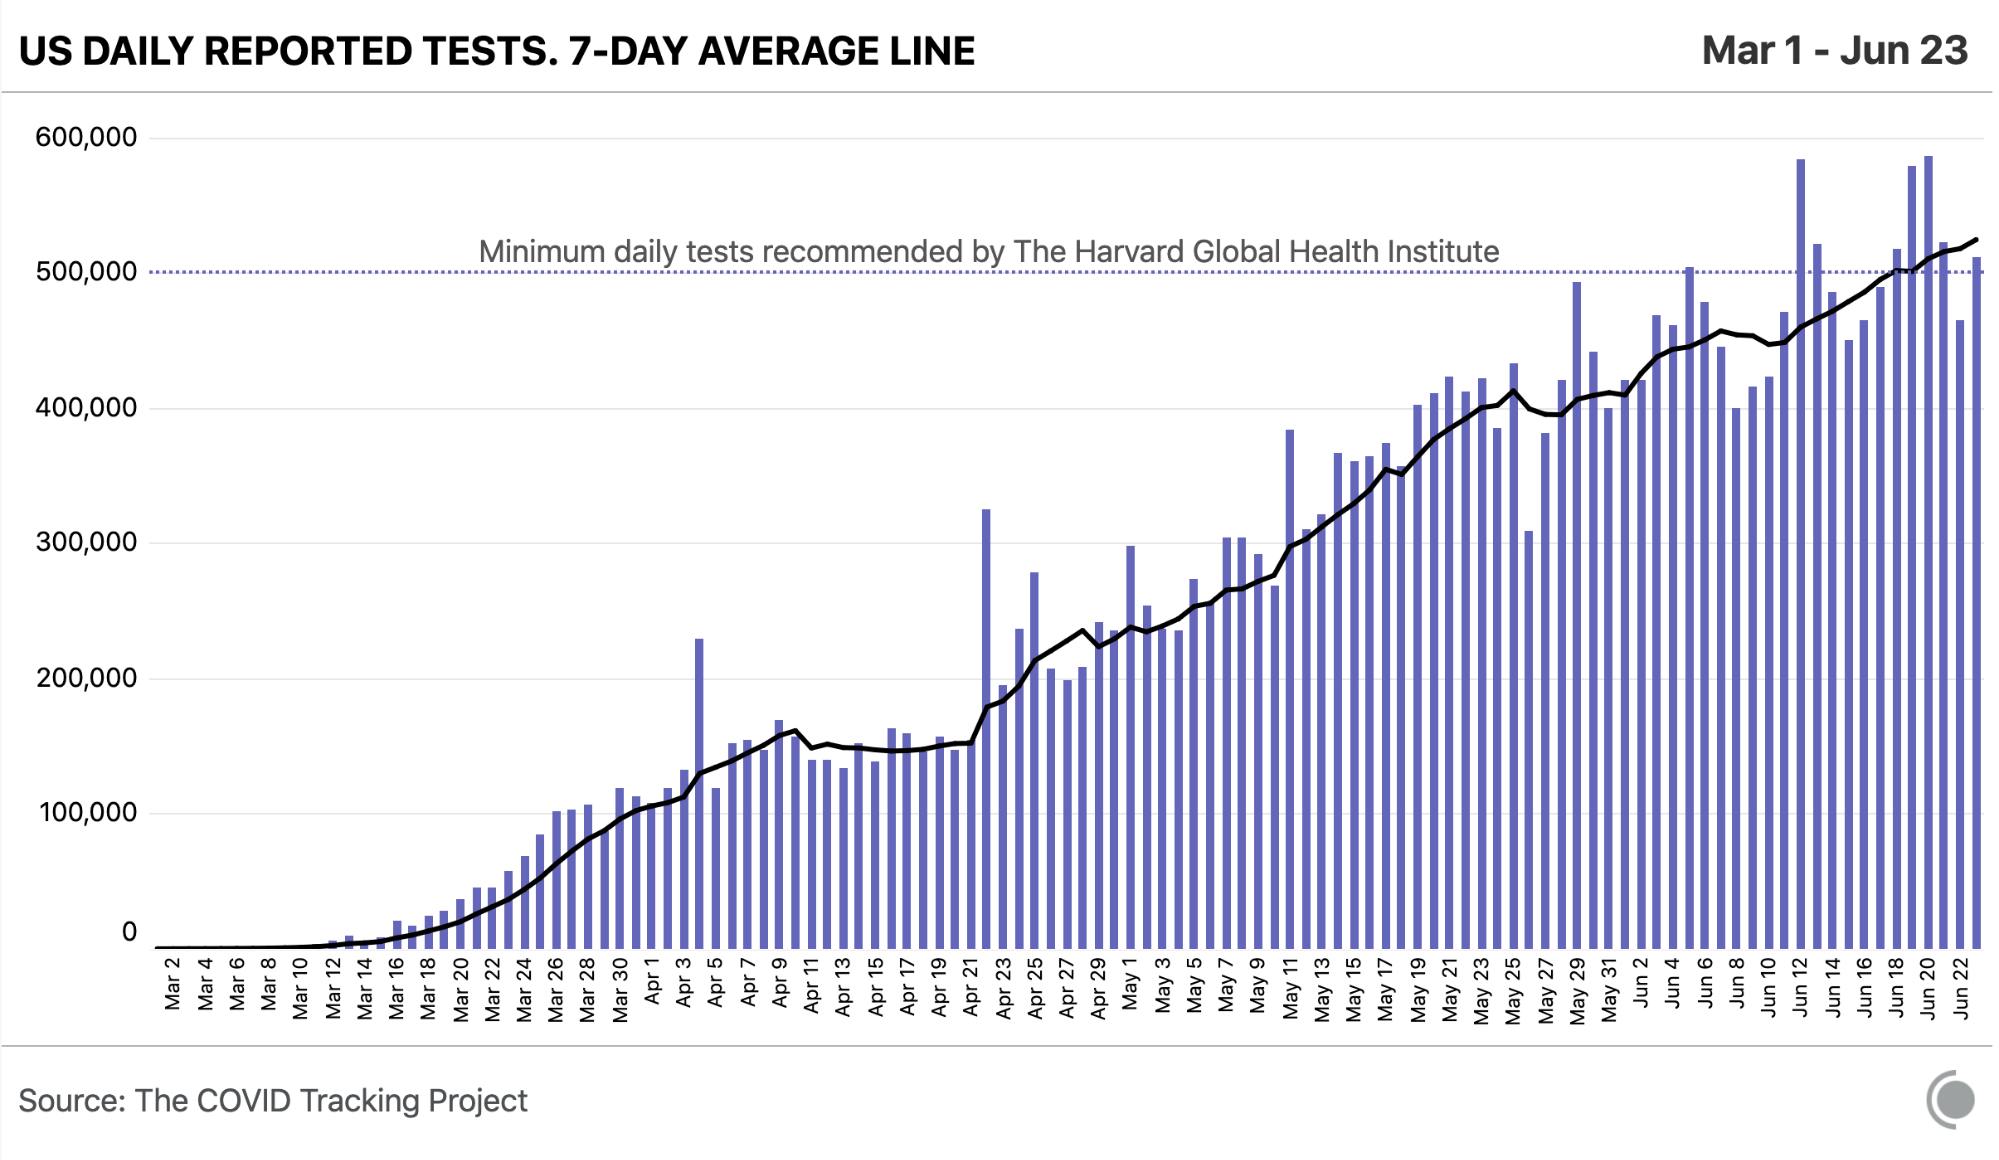 Chart showing daily reported COVID-19 tests rising nationwide, and this week achieving the daily minimum of 500k tests/day over a seven-day average